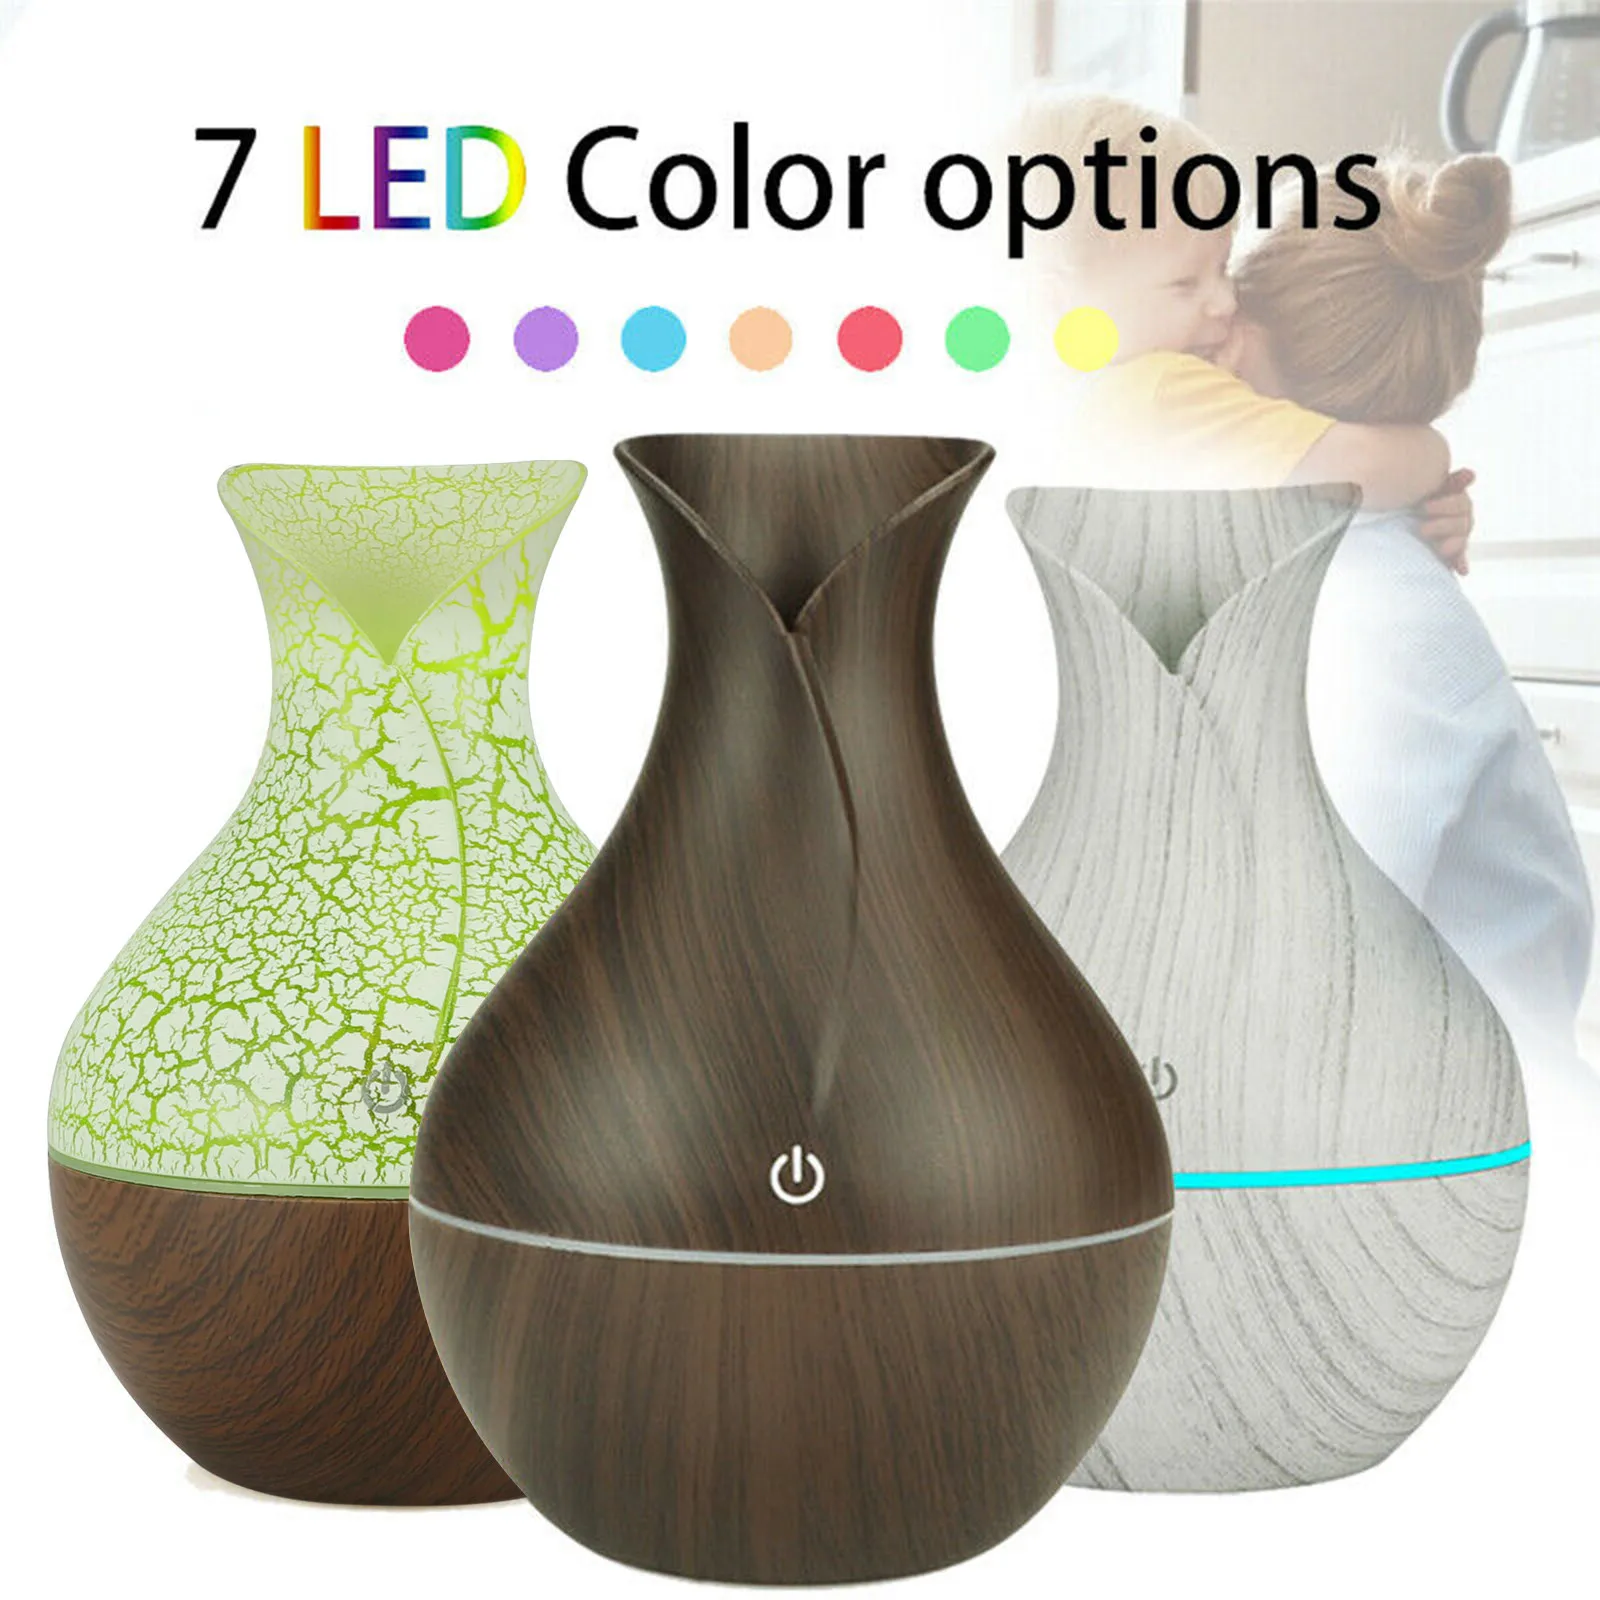 

130ml Led Essential Oil Diffuser Humidifier Usb Aromatherapy Wood Grain Vase Aroma 7 Colors Lights For Home Led Lamp Electric